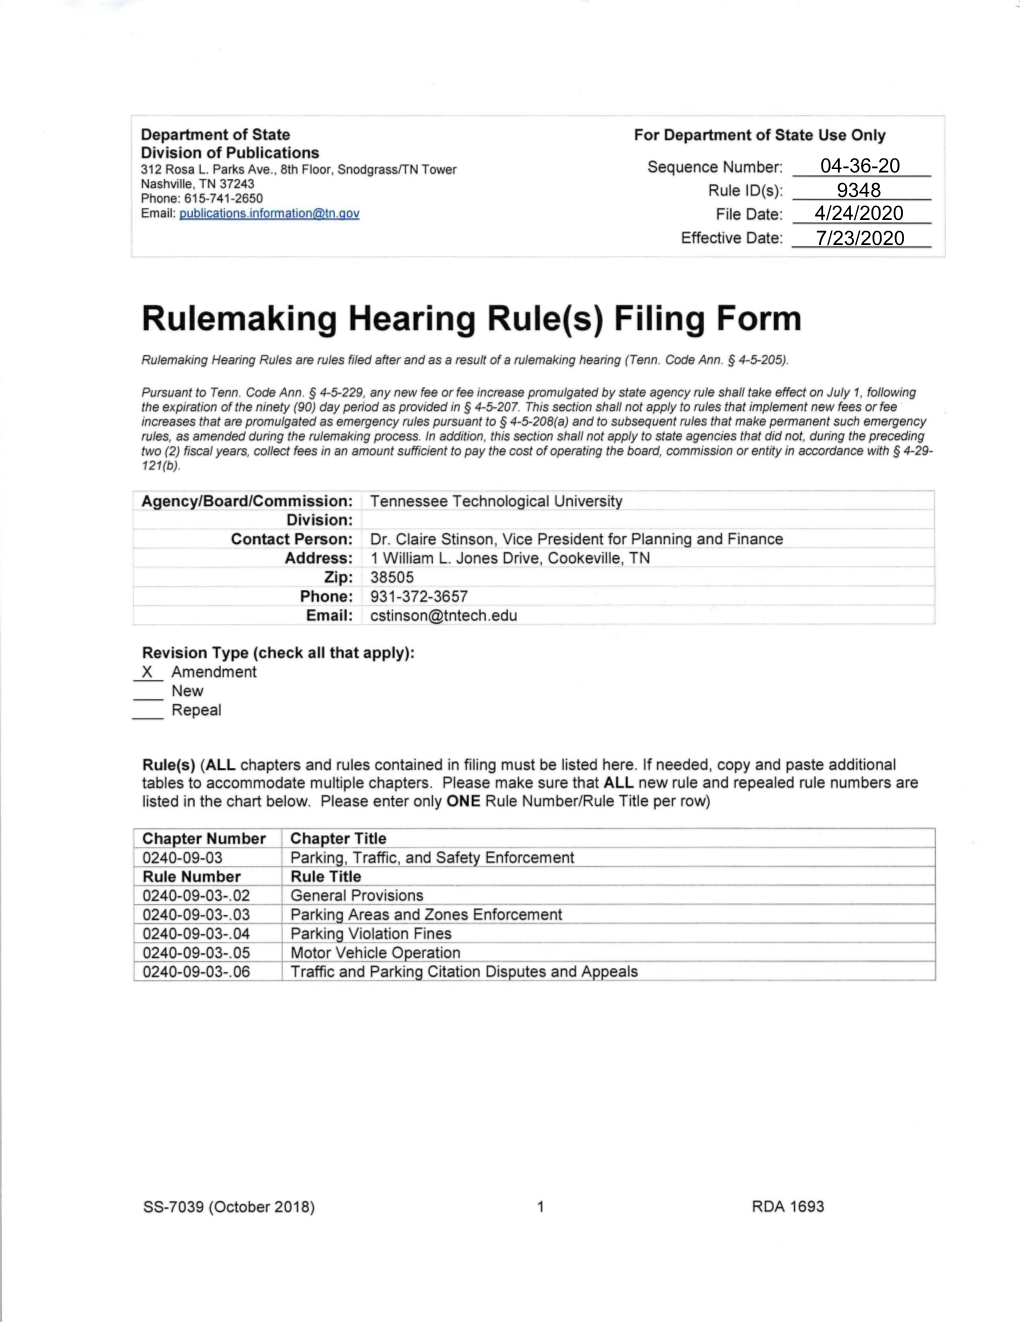 Rulemaking Hearing Rule{S) Filing Form